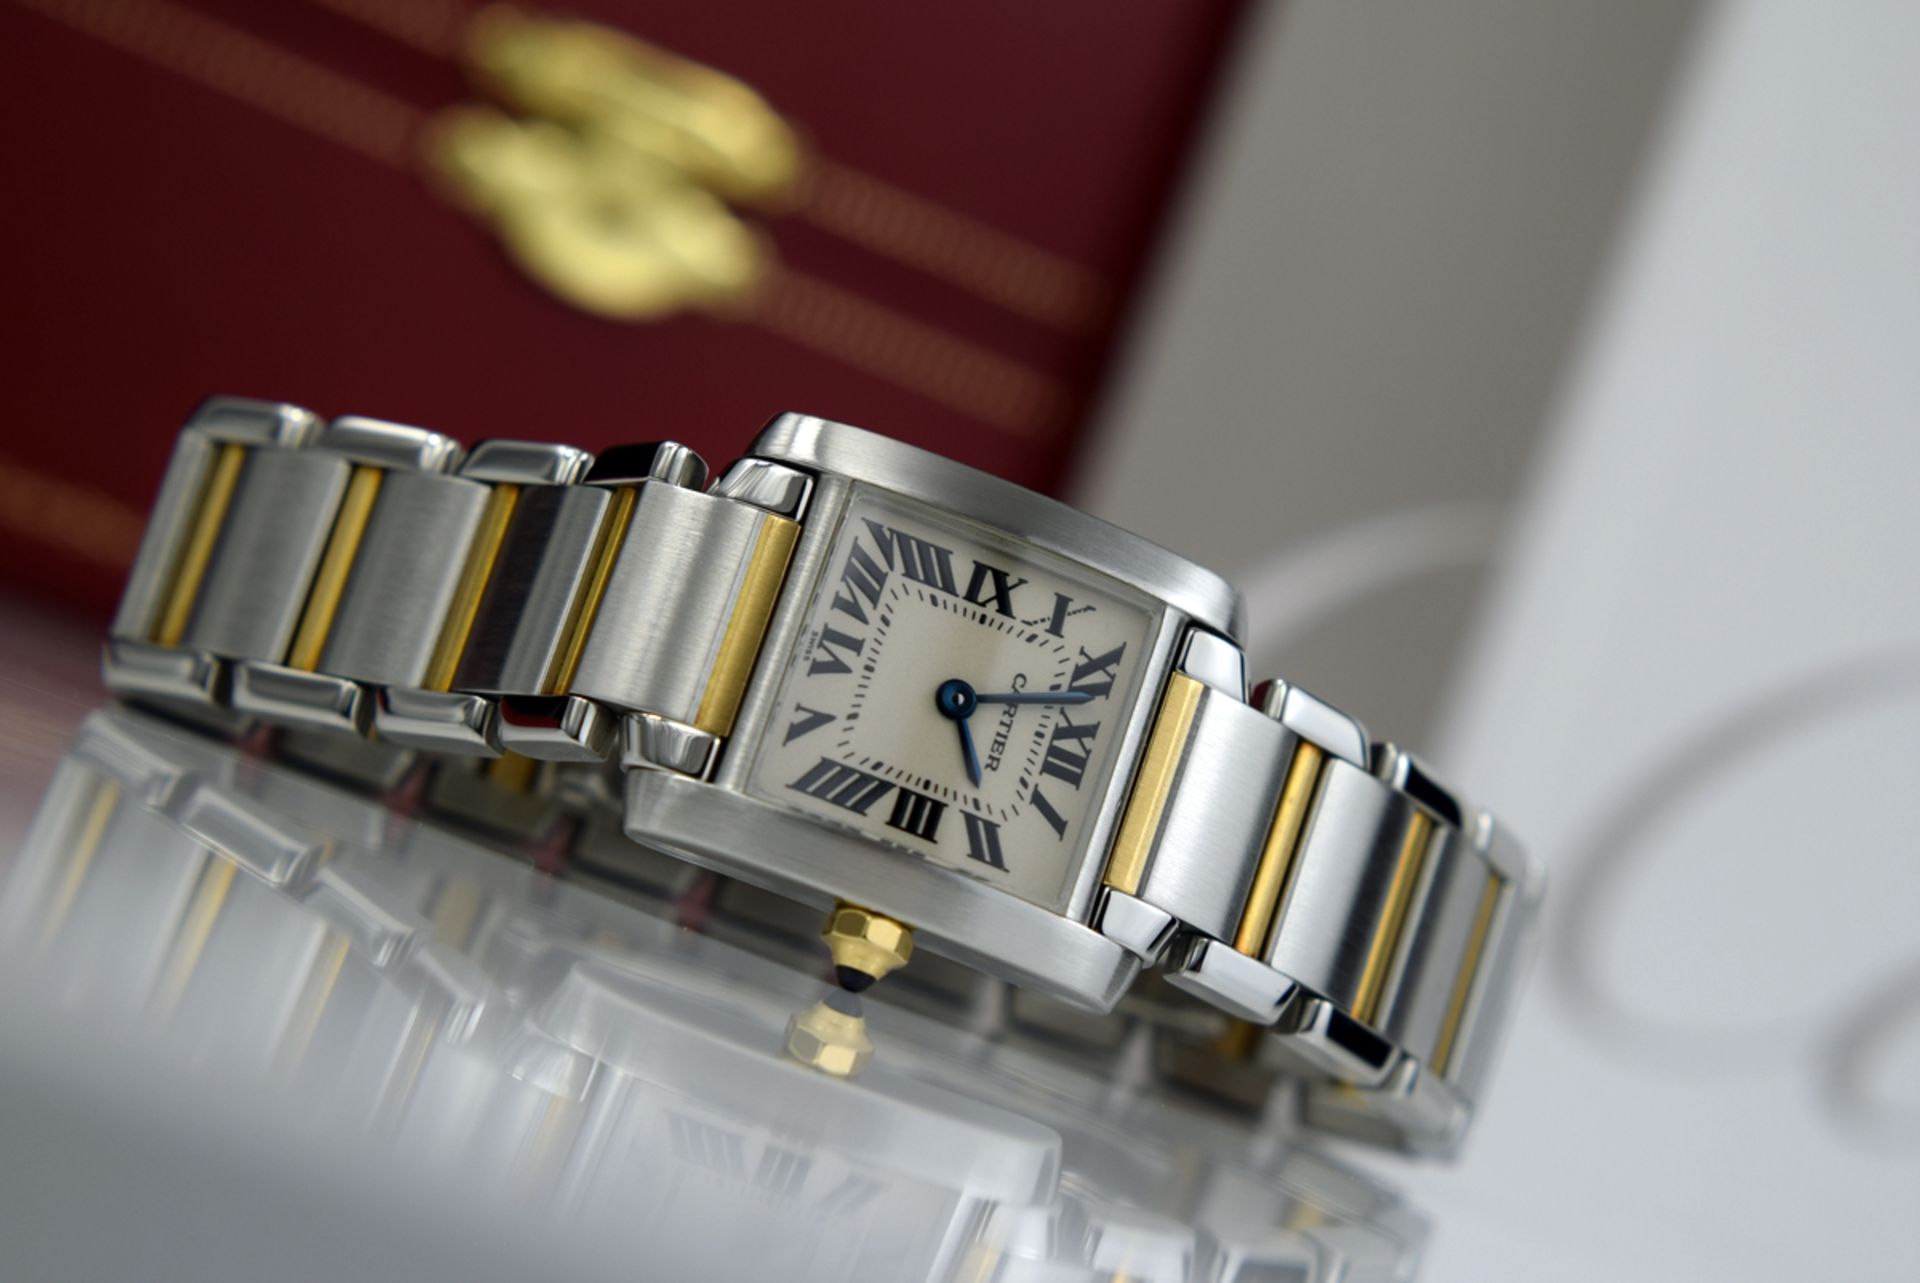 CARTIER TANK FRANCAISE - 18K GOLD & STEEL - W51007Q4 / 2300 - Image 7 of 12